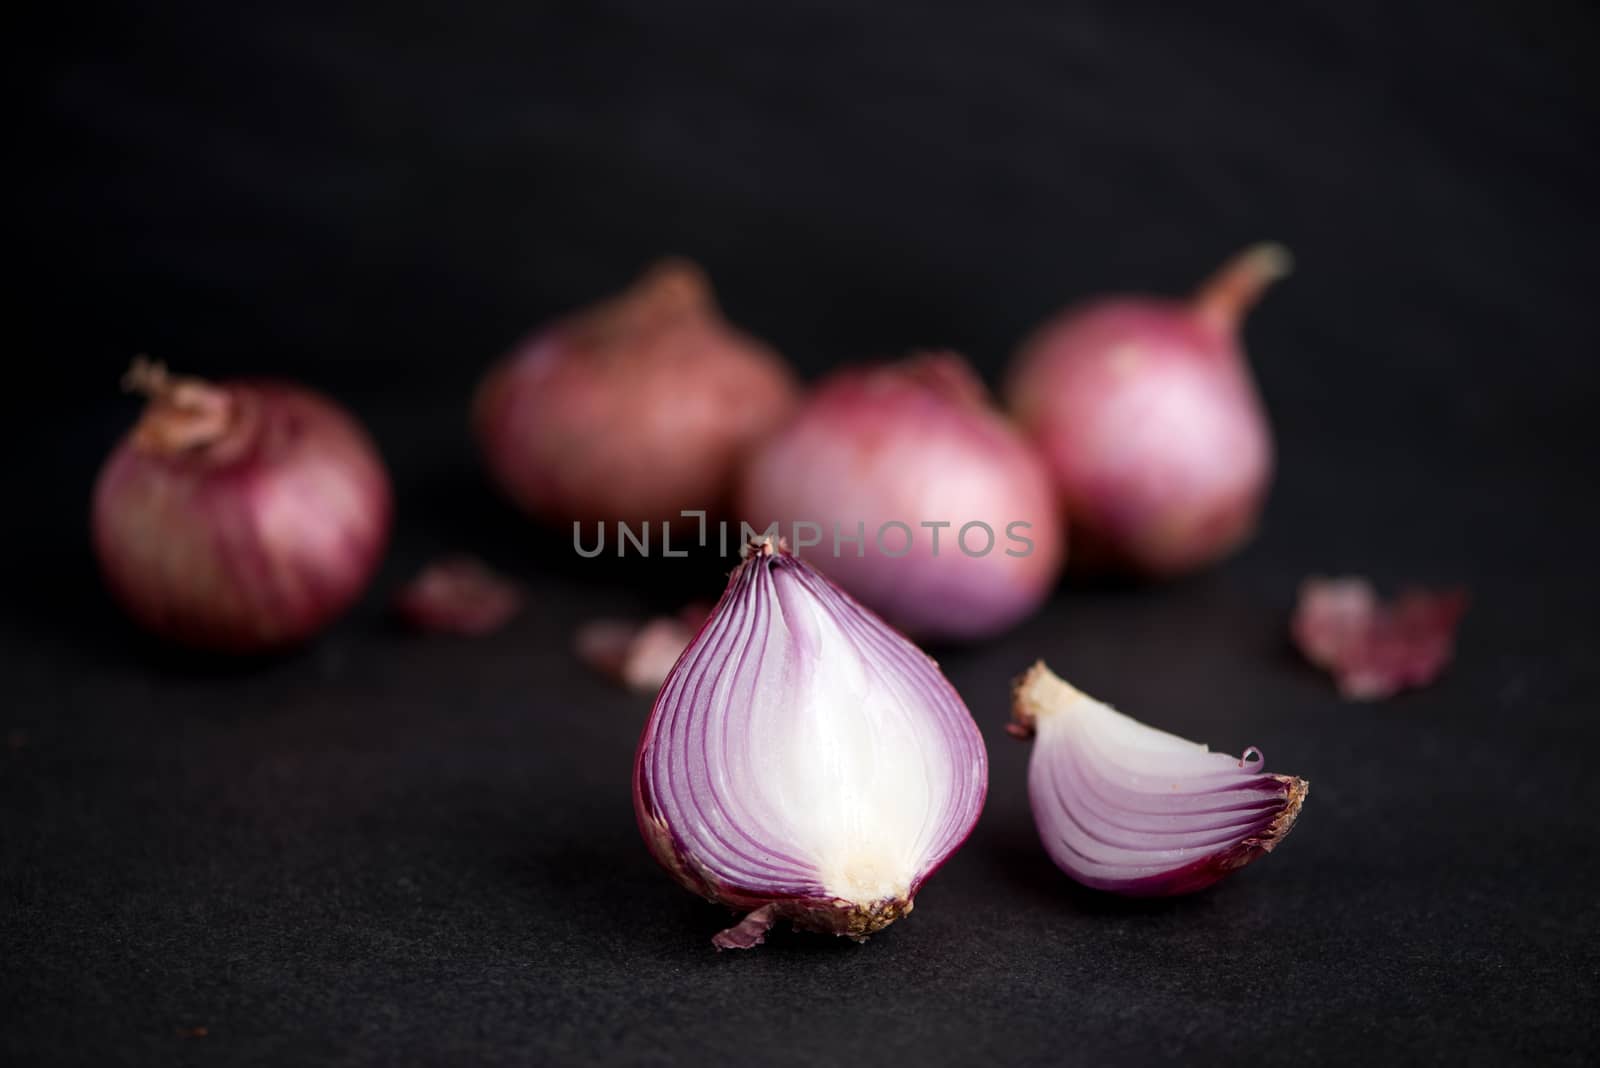 Full and half cut spanish onions on dark background. by makidotvn